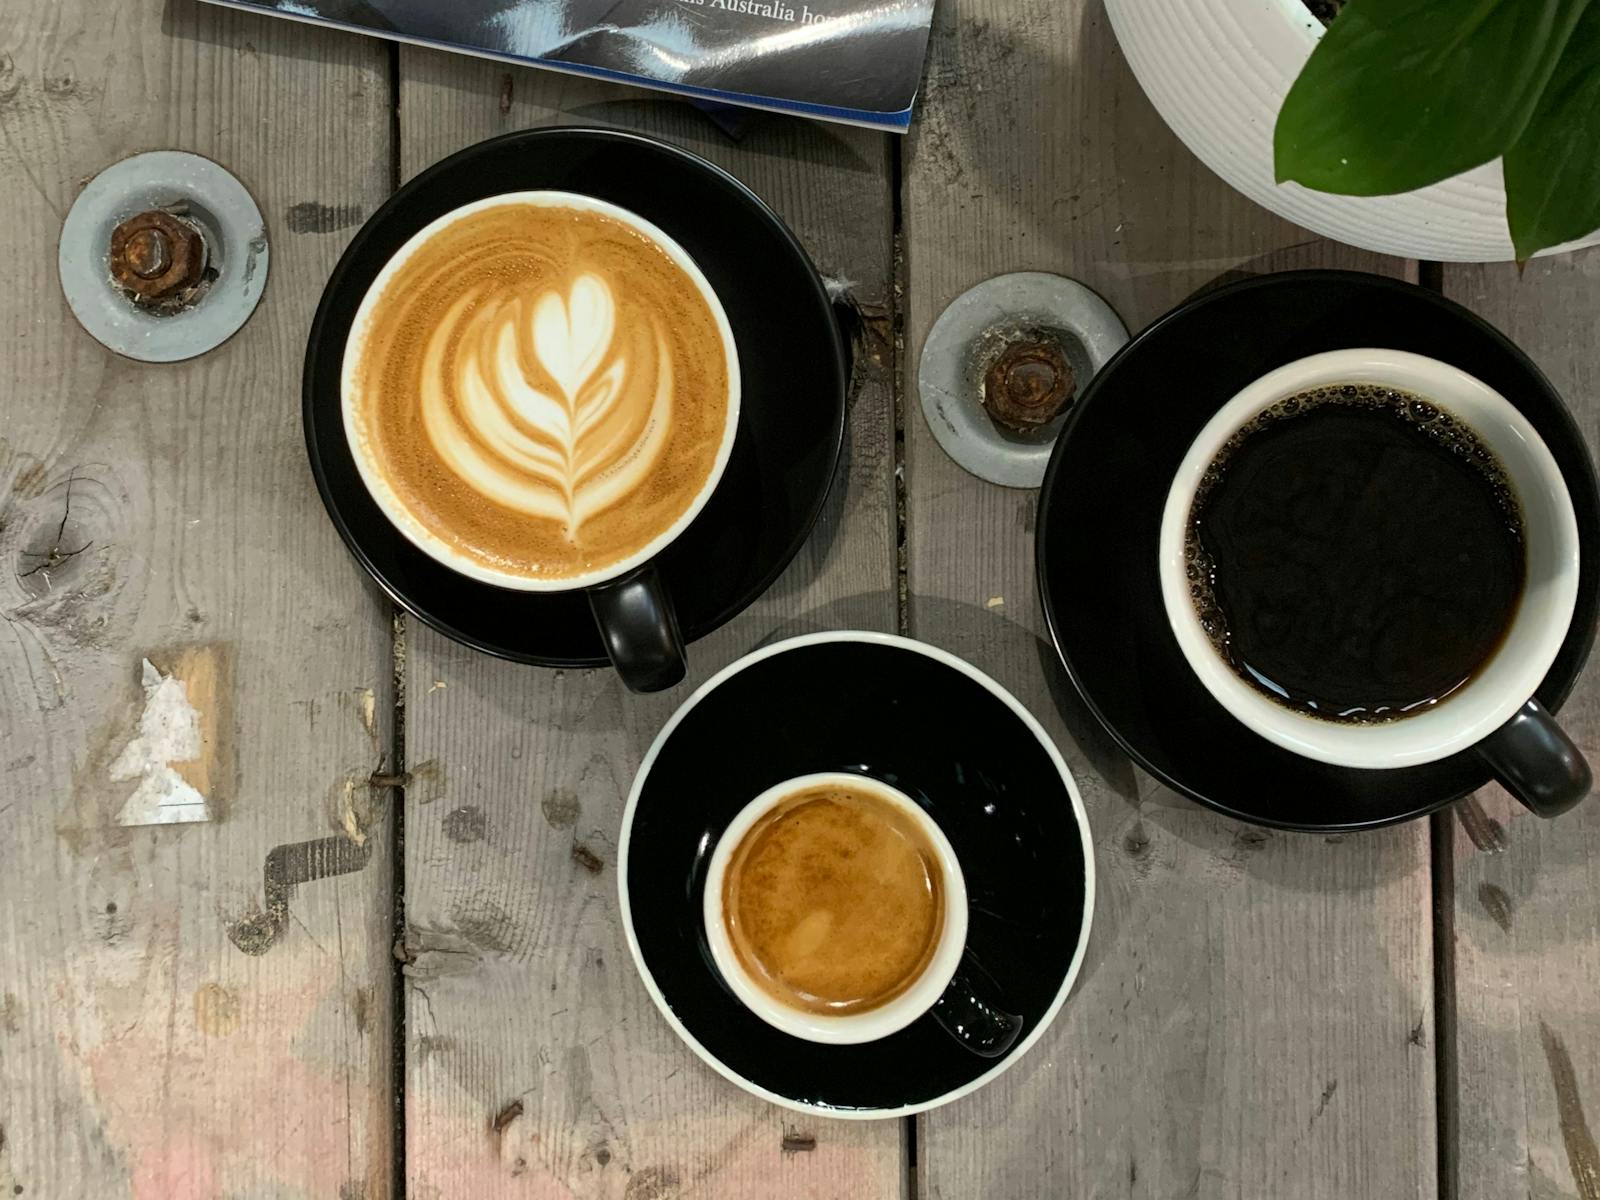 Short Black, Long Black or Milky - How do you like your coffee?